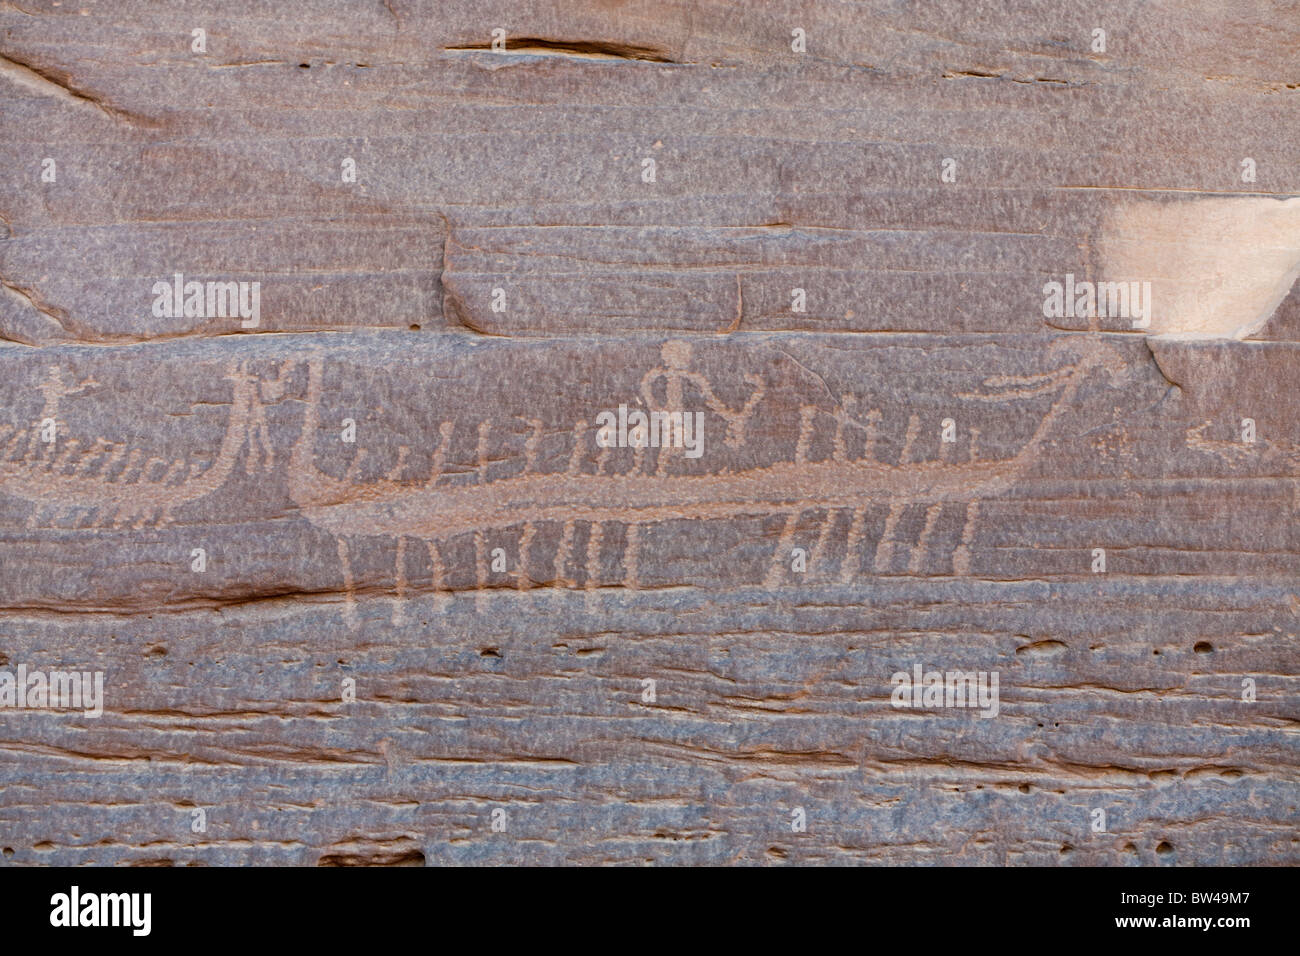 Petroglyph of high prowed boat with crew in the Wadi Umm Salam in Egypt's Eastern Desert Stock Photo